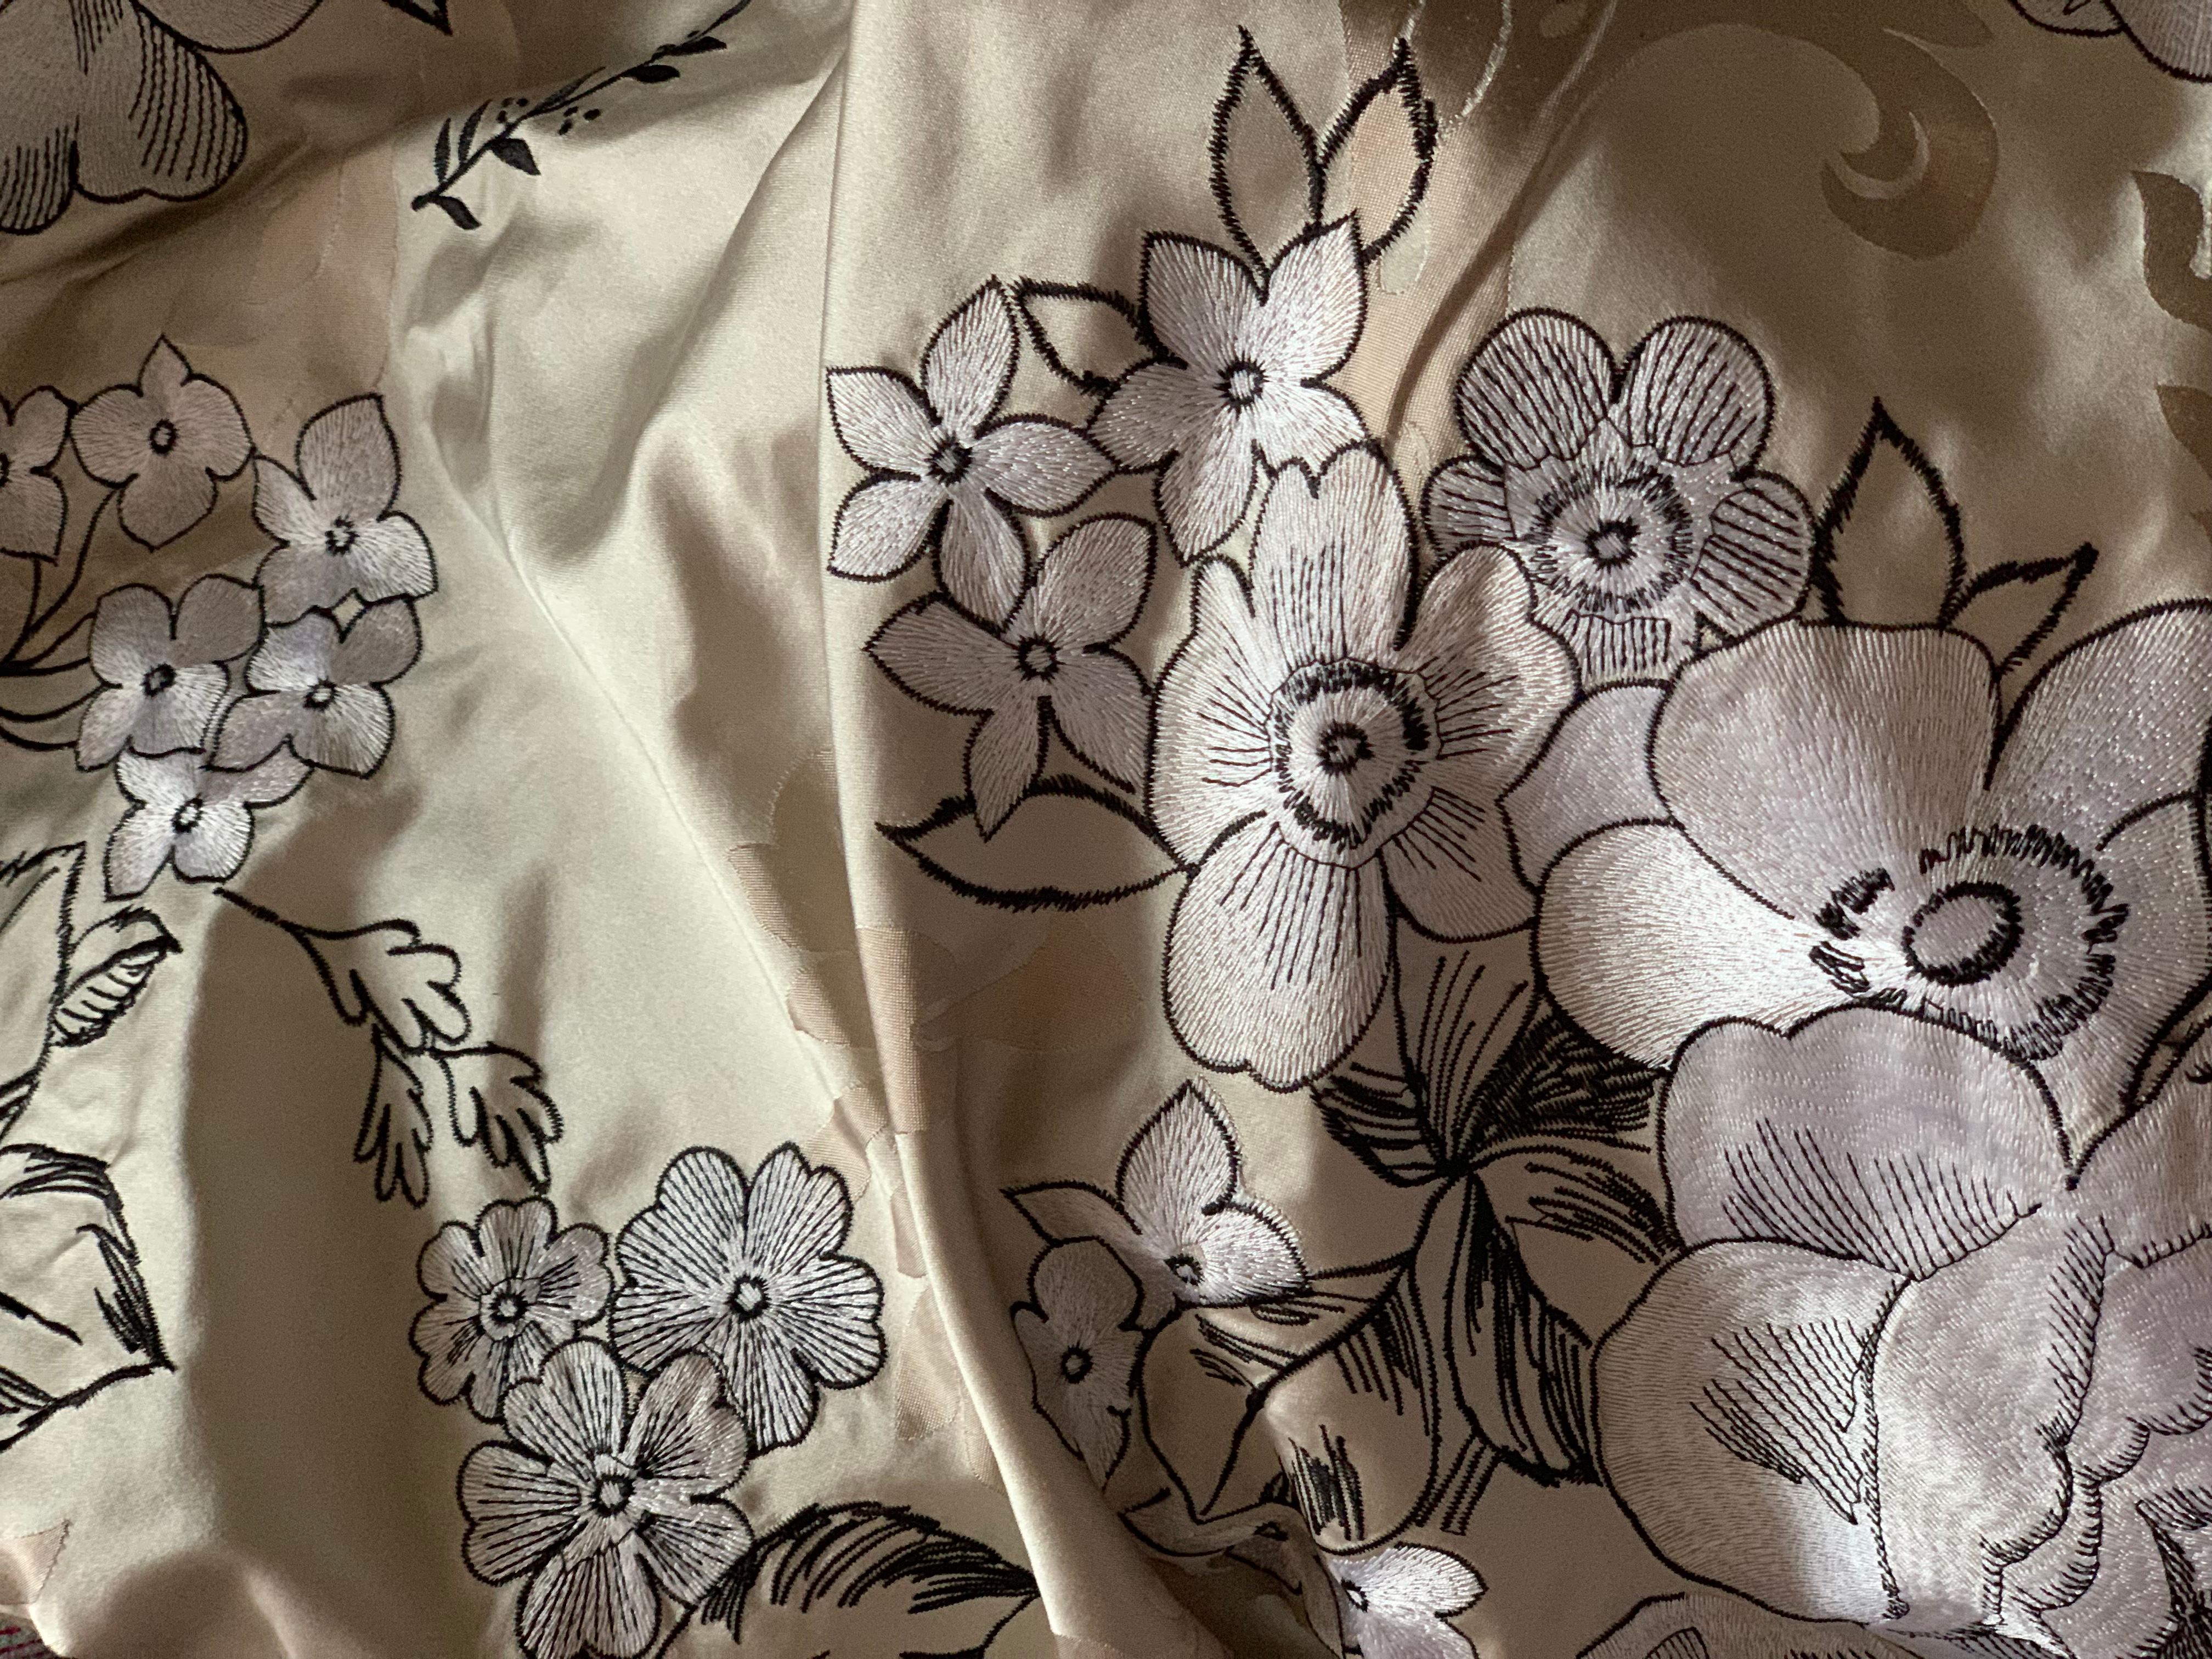 Midcentury embroidered silk fabric, white floral champagne taupe, rare vintage. Gorgeous midcentury textile. Marked 100 percent silk. Approximately 7 yards. About 48” width. Lovely graphic, pop art quality to the traditional floral design and luxury